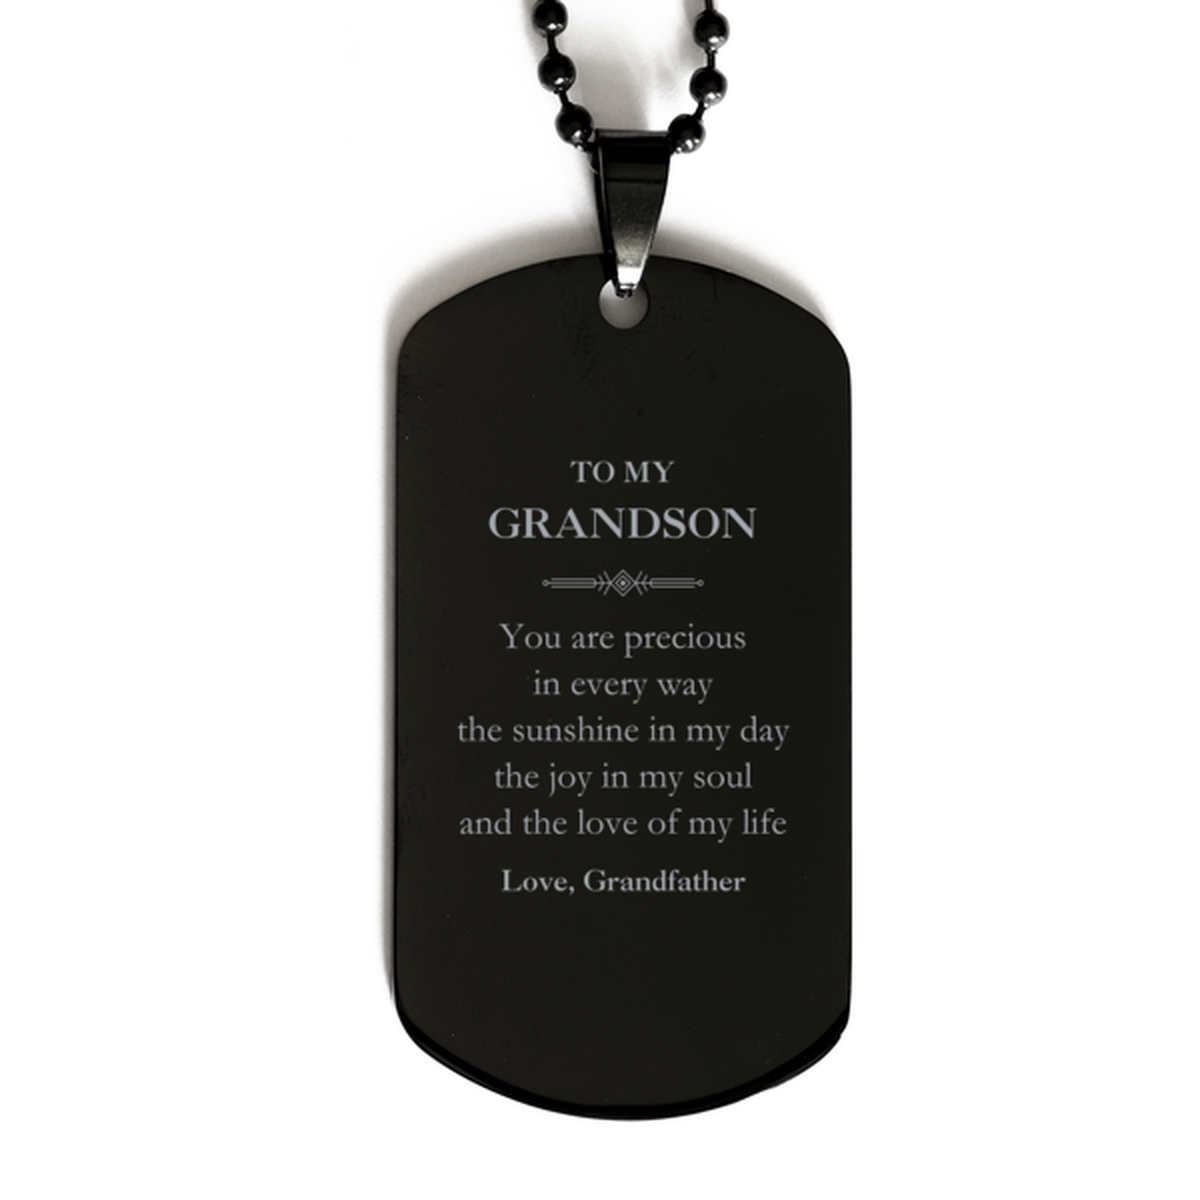 Graduation Gifts for Grandson Black Dog Tag Present from Grandfather, Christmas Grandson Birthday Gifts Grandson You are precious in every way the sunshine in my day. Love, Grandfather